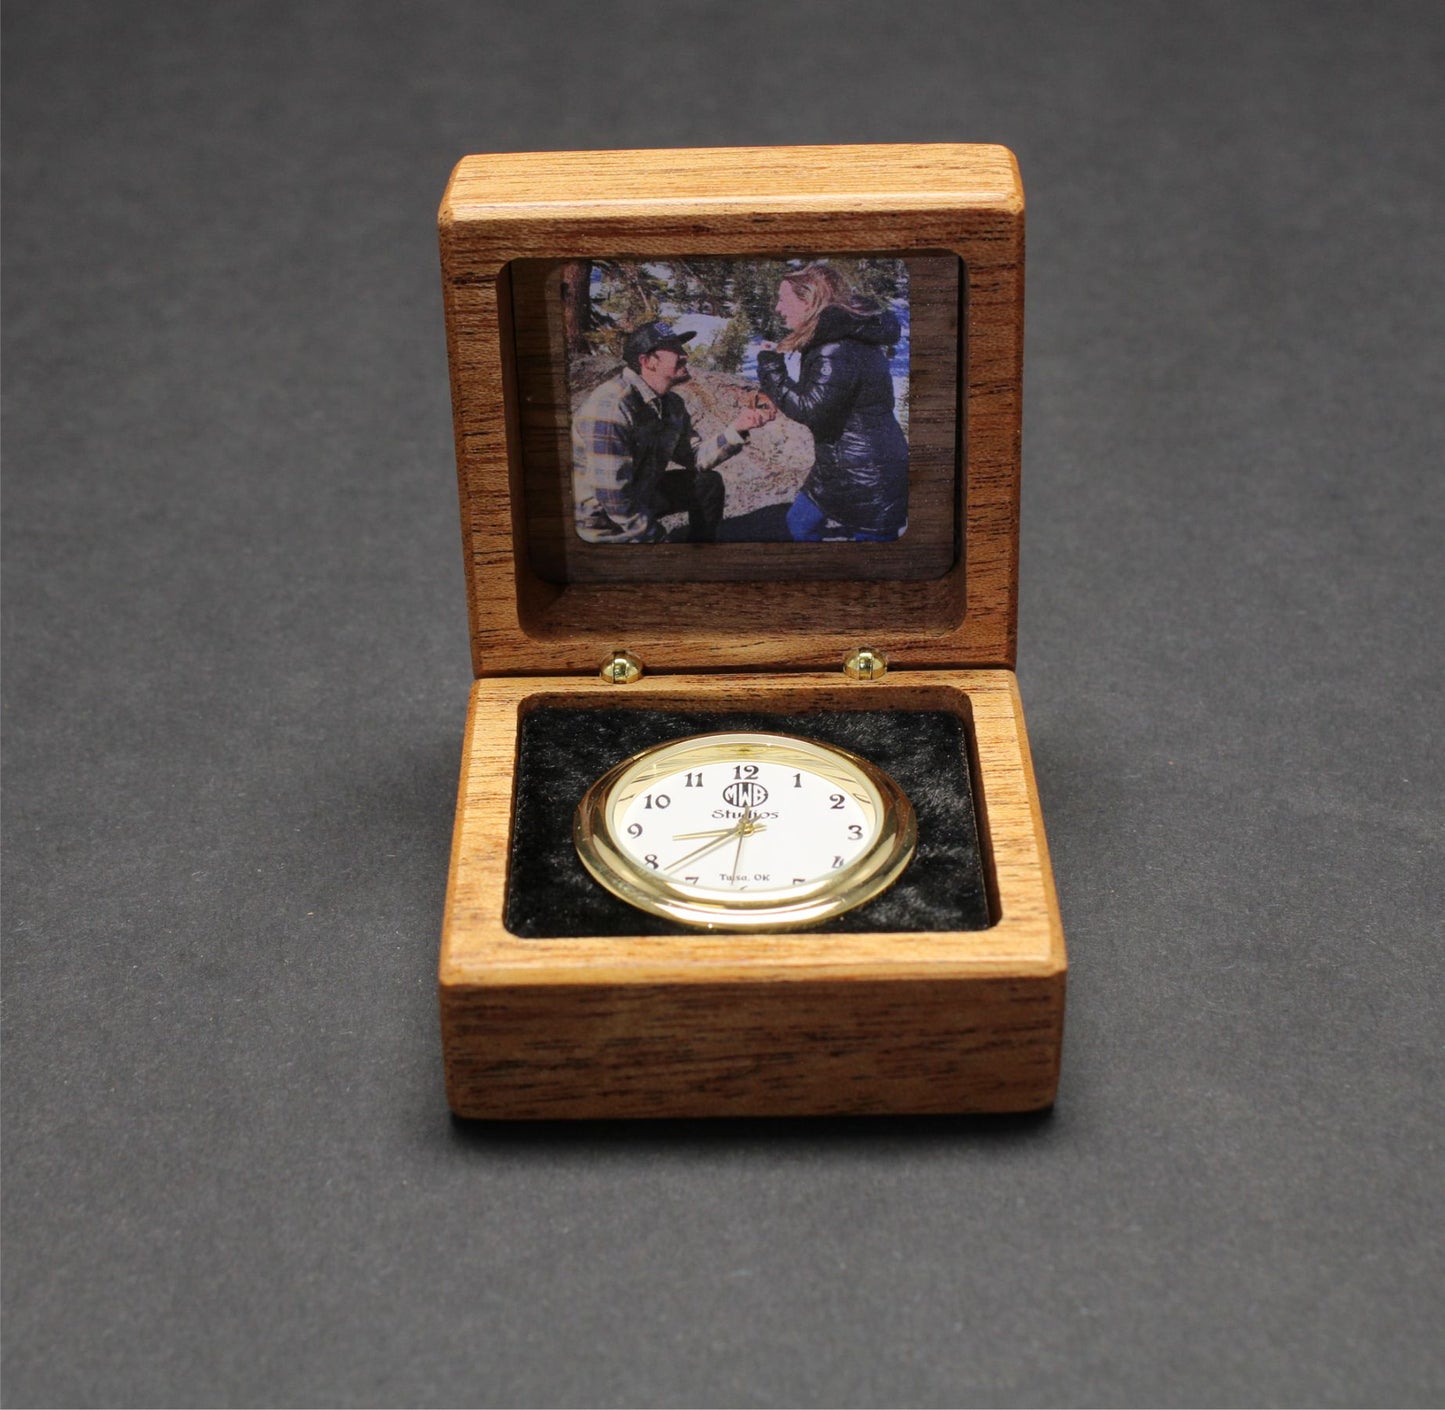 Handcrafted Walnut Ring Box "I Promise"  RB-128   Made in the U.S.